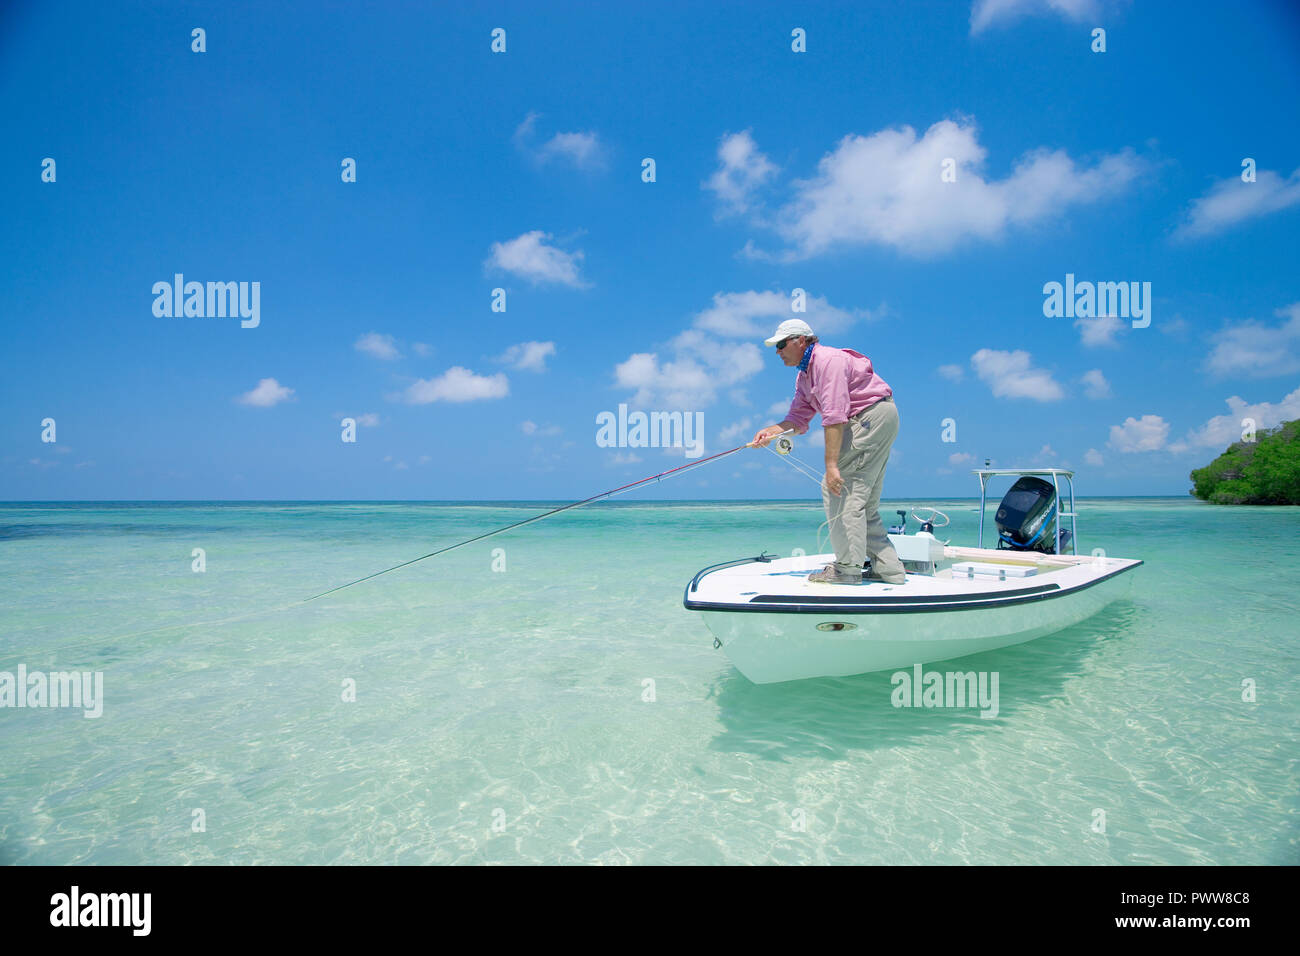 Saltwater fly fishing Stock Photo